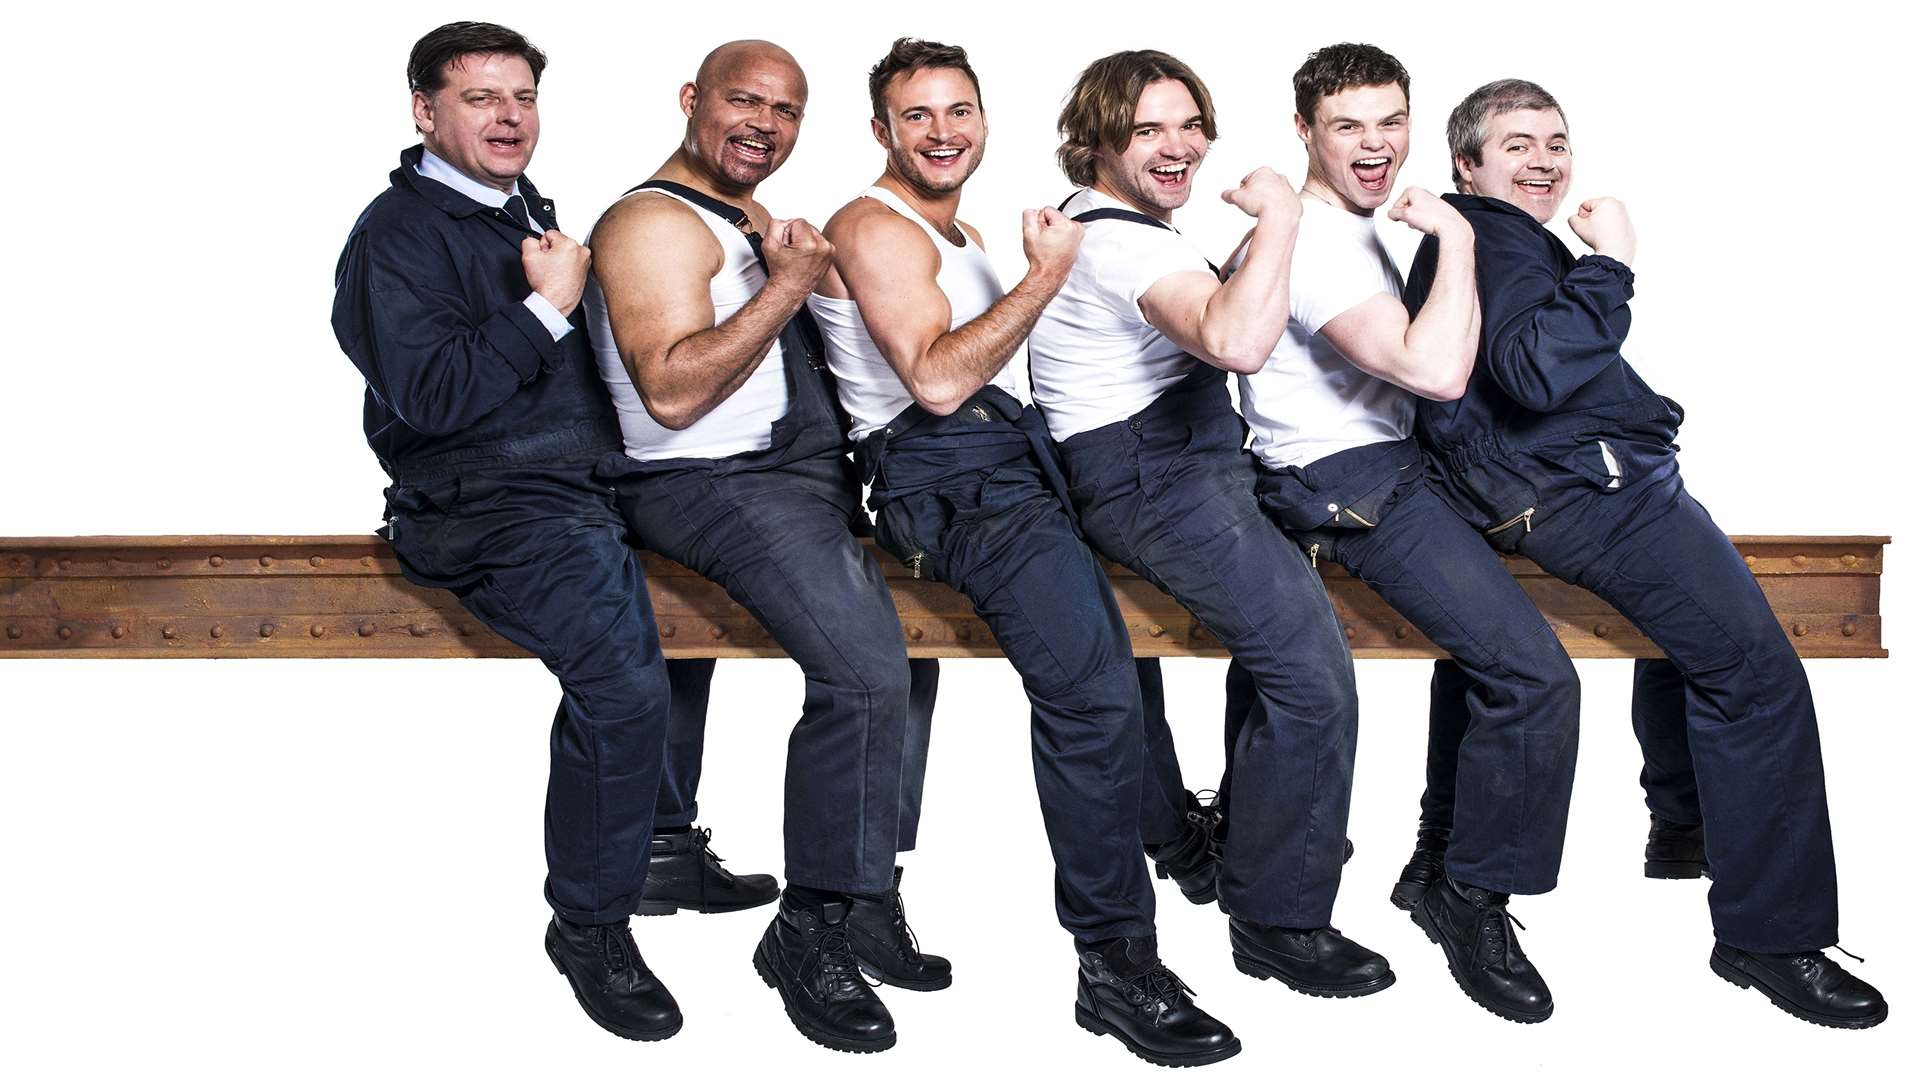 Going the Full Monty, from left, Andrew Dunn, Louis Emerick, Gary Lucy, Rupert Hill, Bobby Schofield and Martin Miller